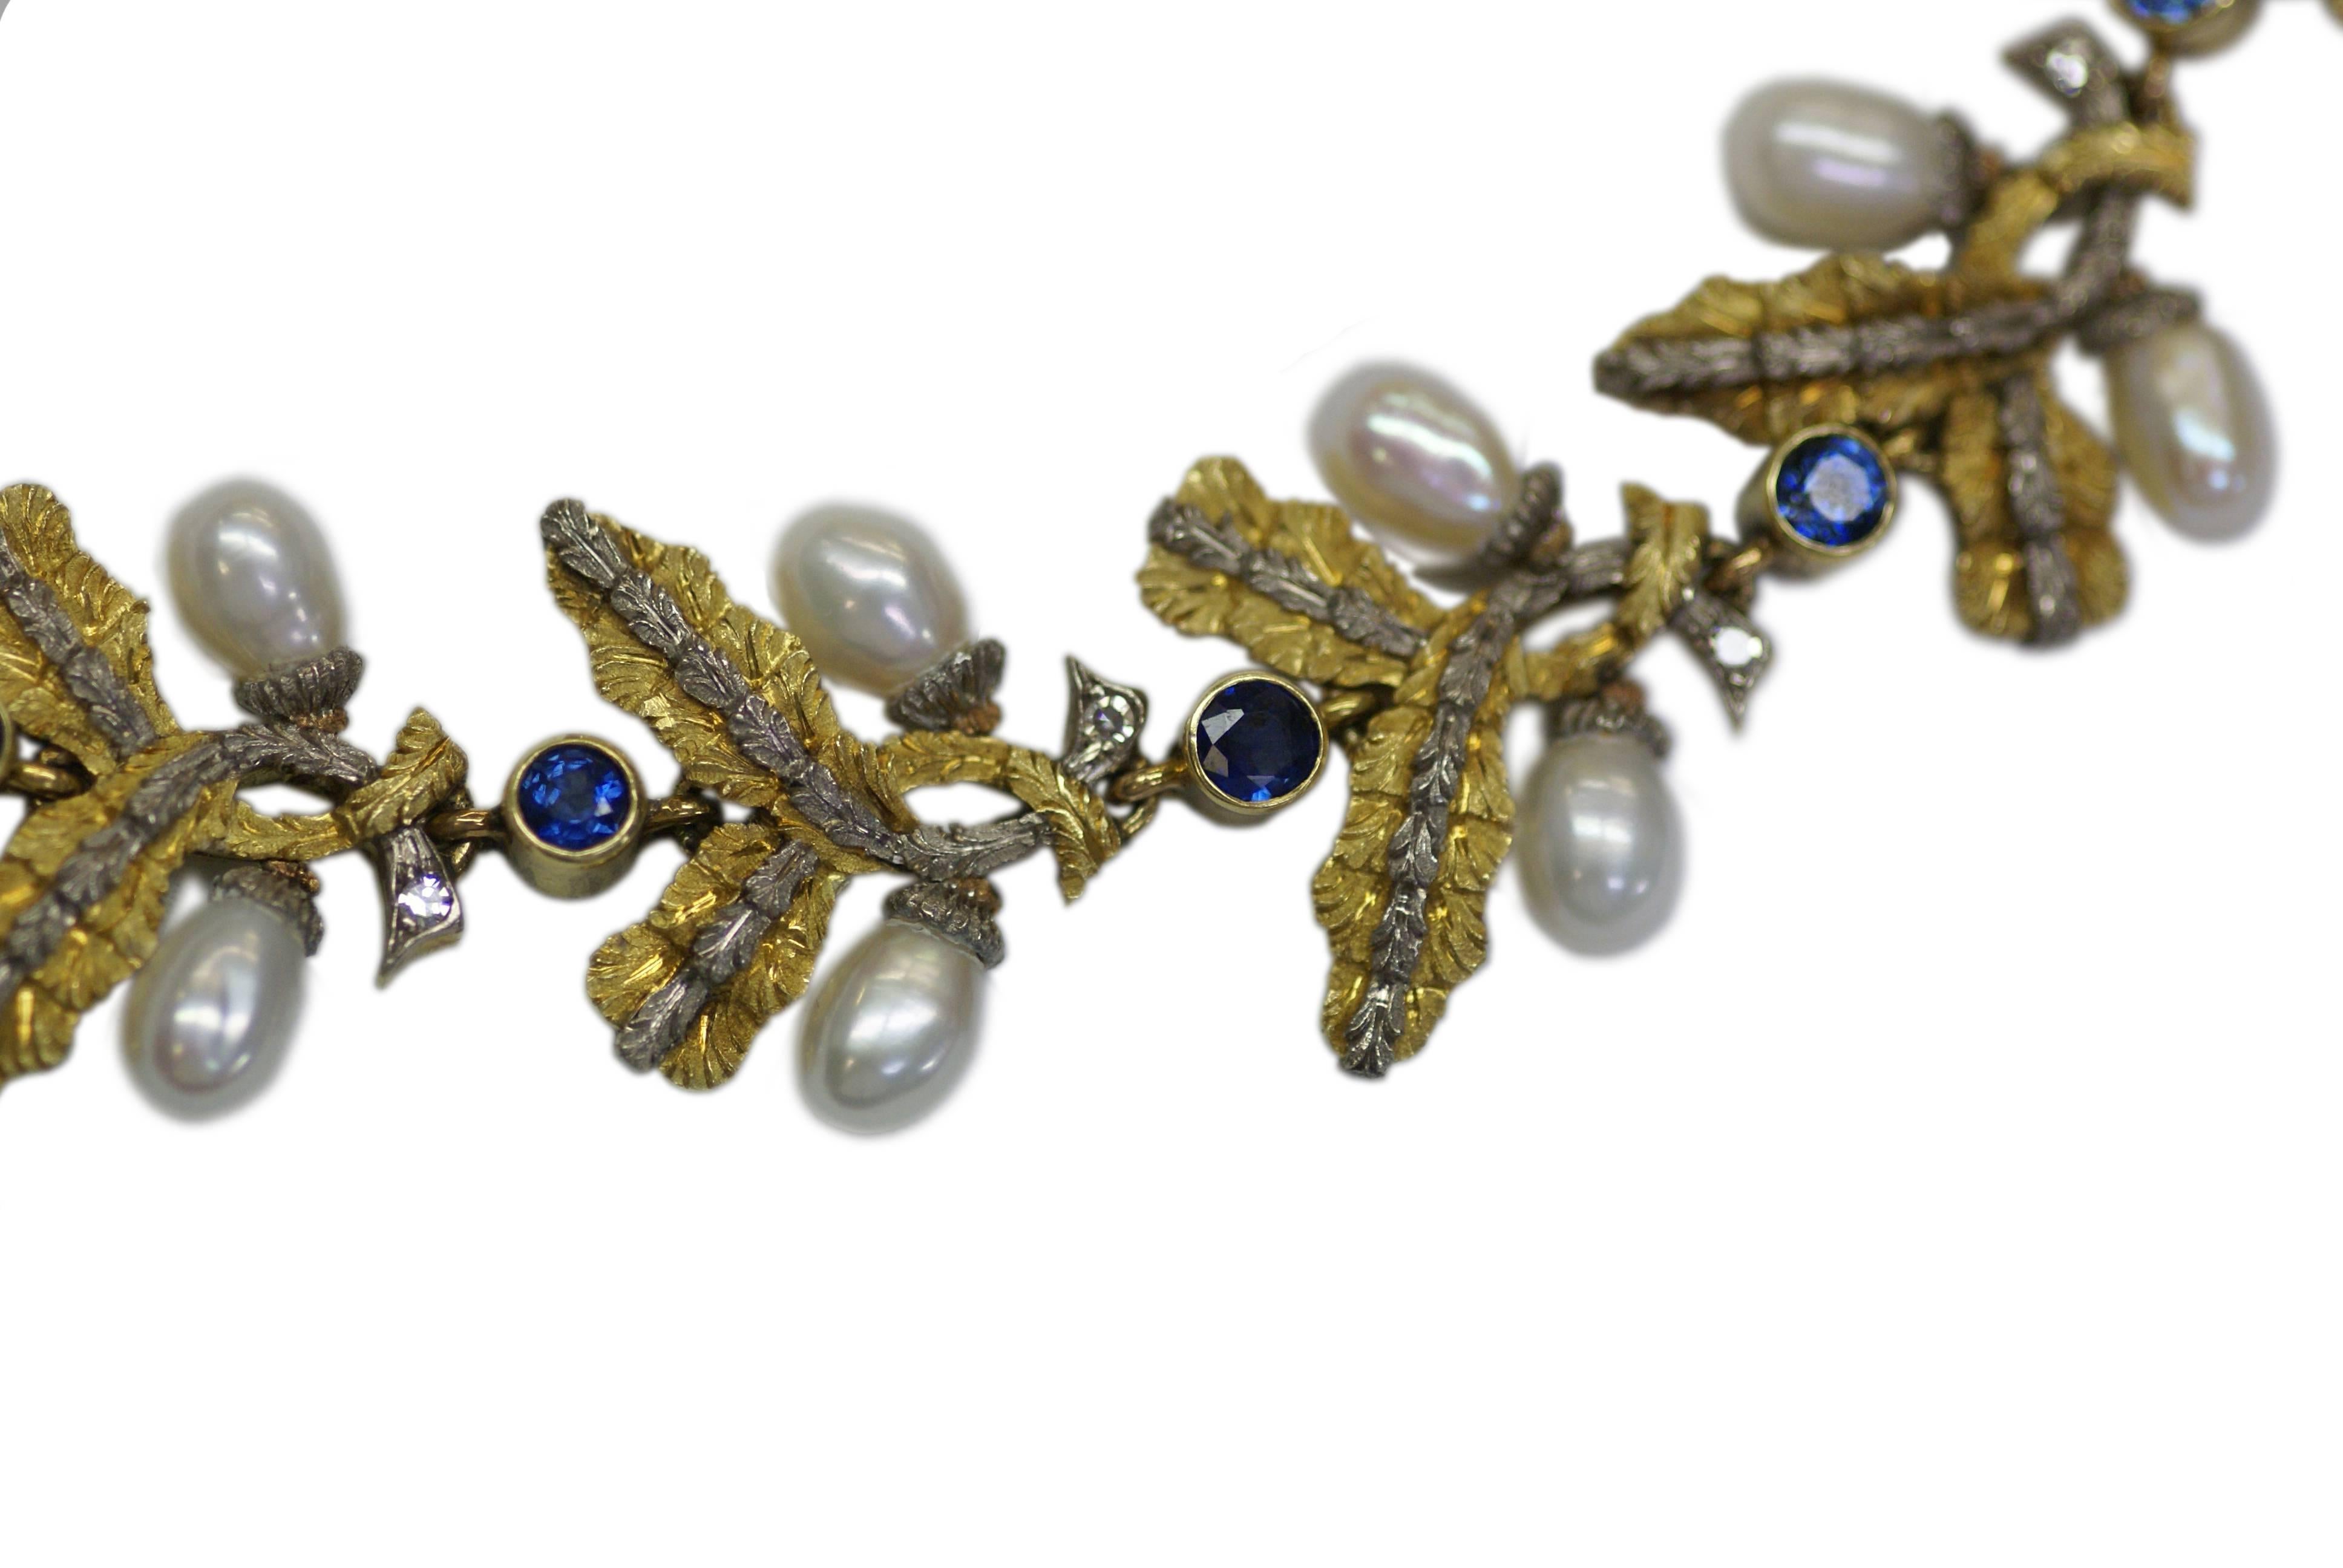 A sophisticated necklace of folate design by historical roman jeweler Cazzaniga, presenting pearls and sapphires on a mixed 18kt yellow and gold mounting. Italy, circa 1965.